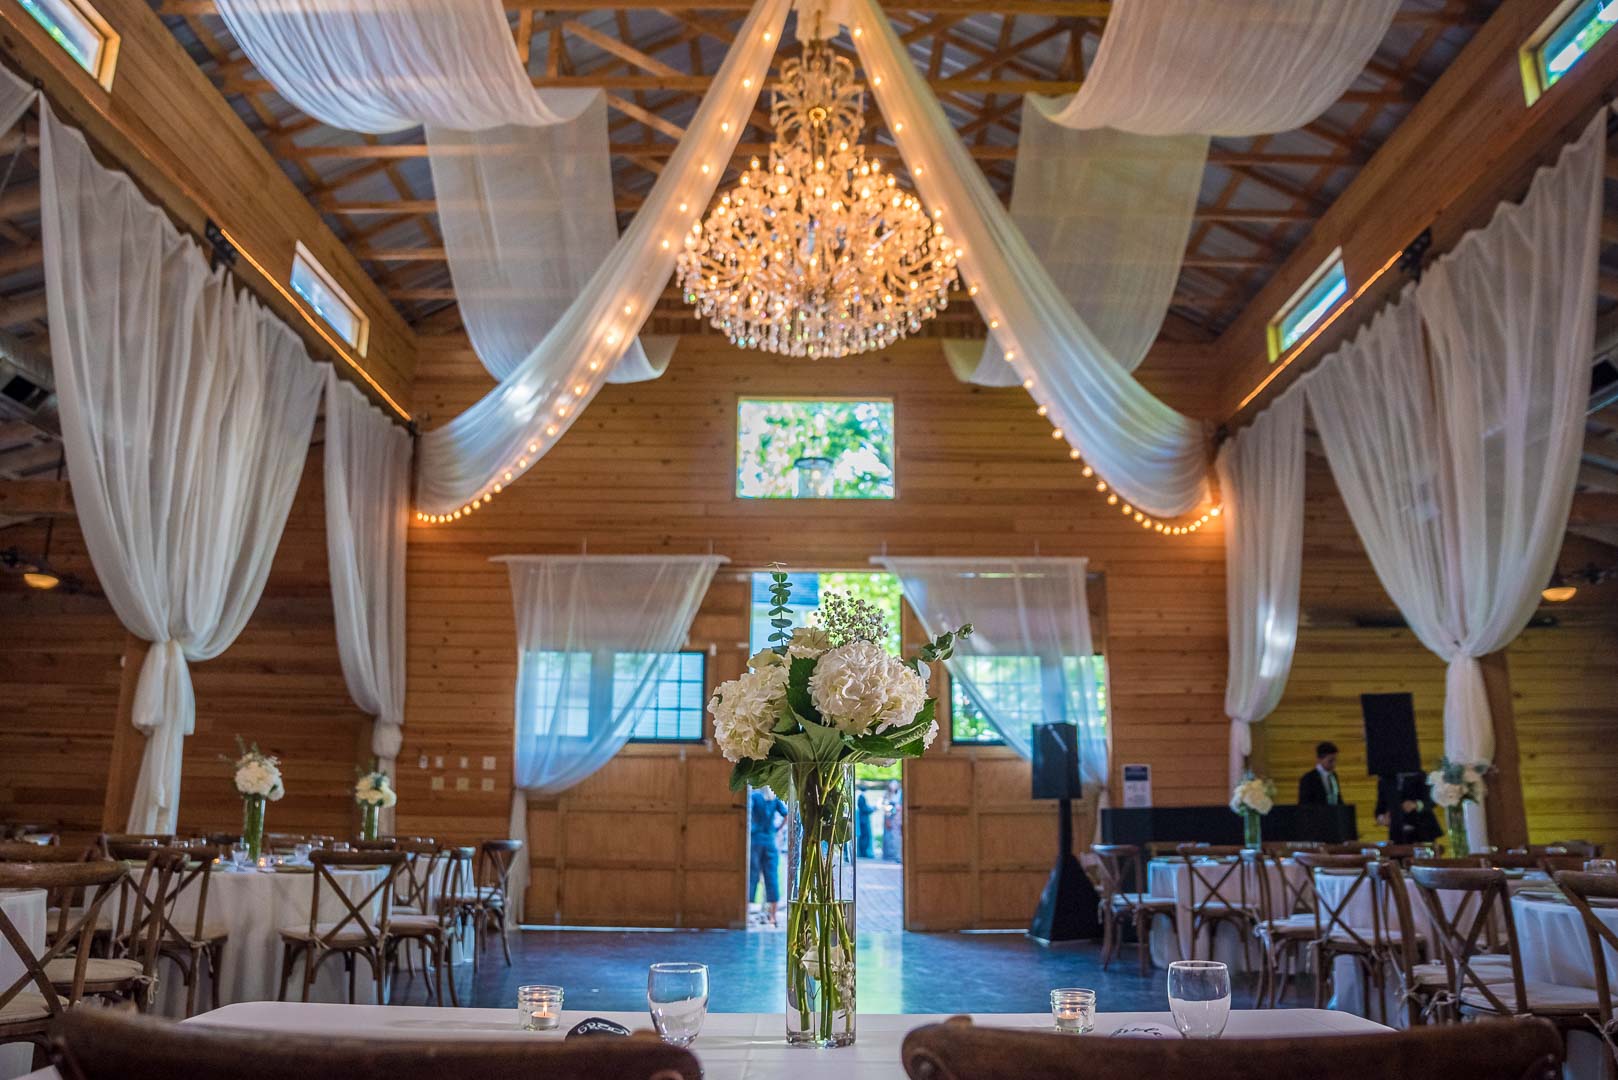 Decor inside the barn at the Wheeler House featuring crystal chandelier